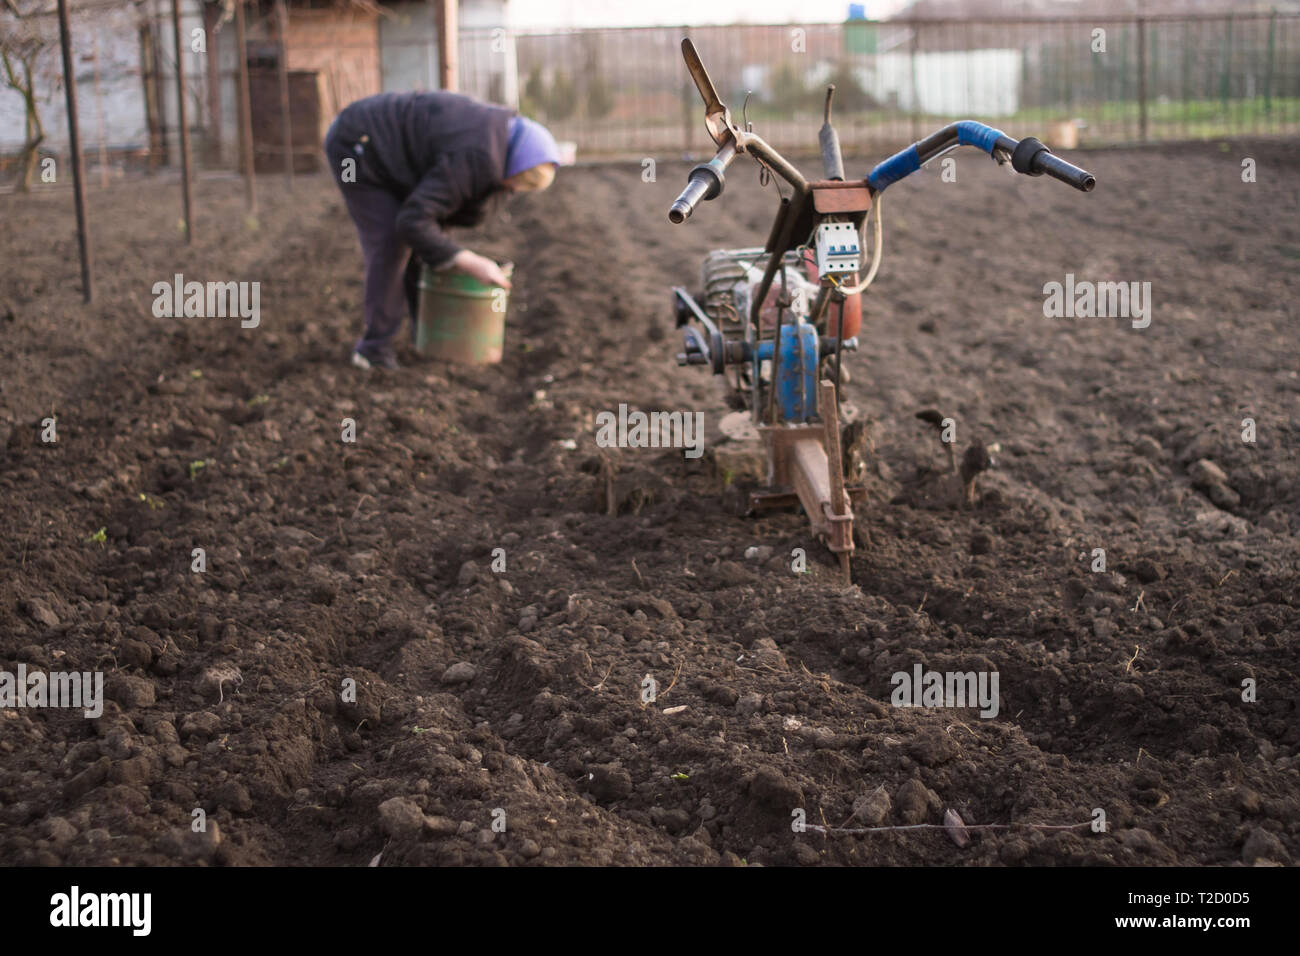 Farmer planting into the soil. Cultivator in the foreground. Stock Photo